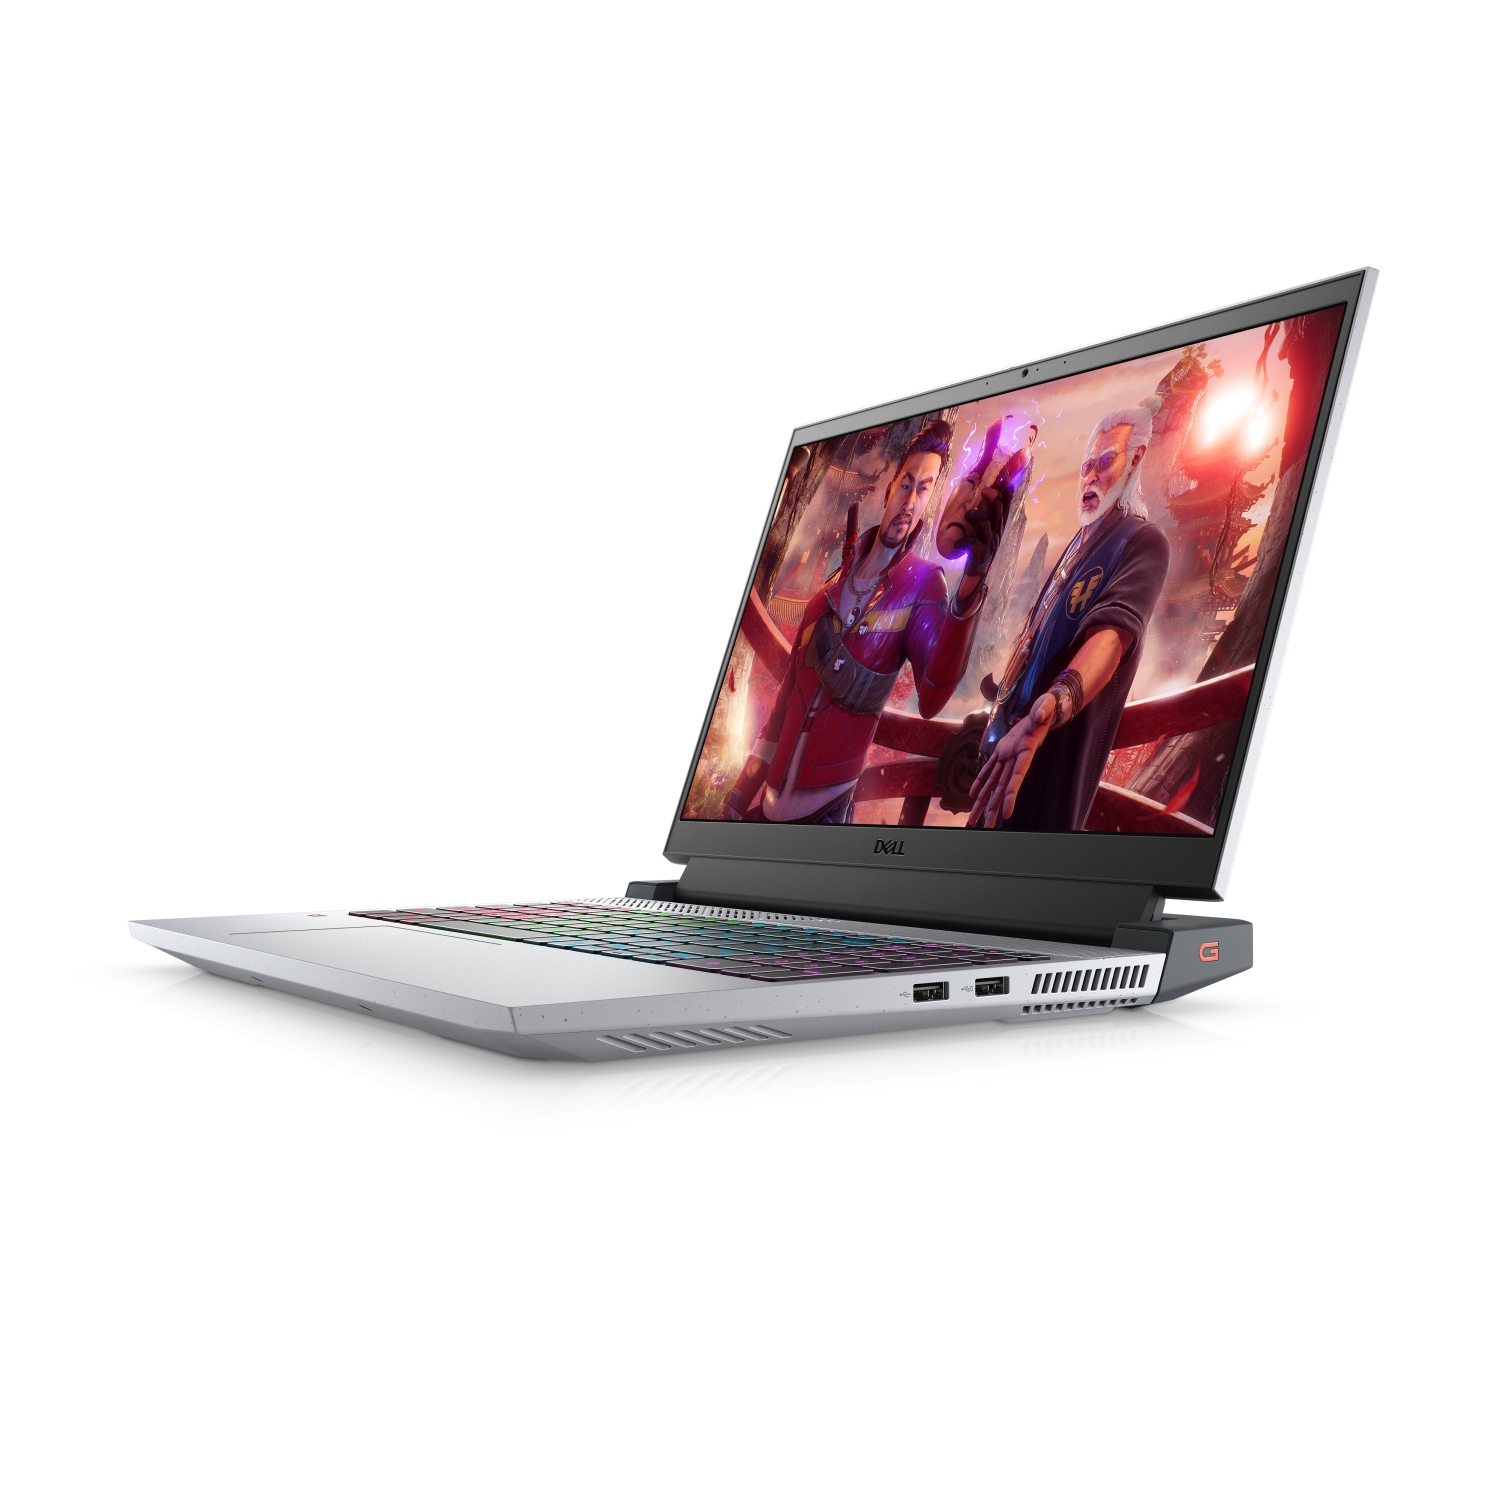 Dell G15 5515 Gaming Laptop (2021) | 15.6" FHD | Core Ryzen 5 - 512GB SSD - 8GB RAM - RTX 3050 | 6 Cores @ 4.6 GHz Certified Refurbished